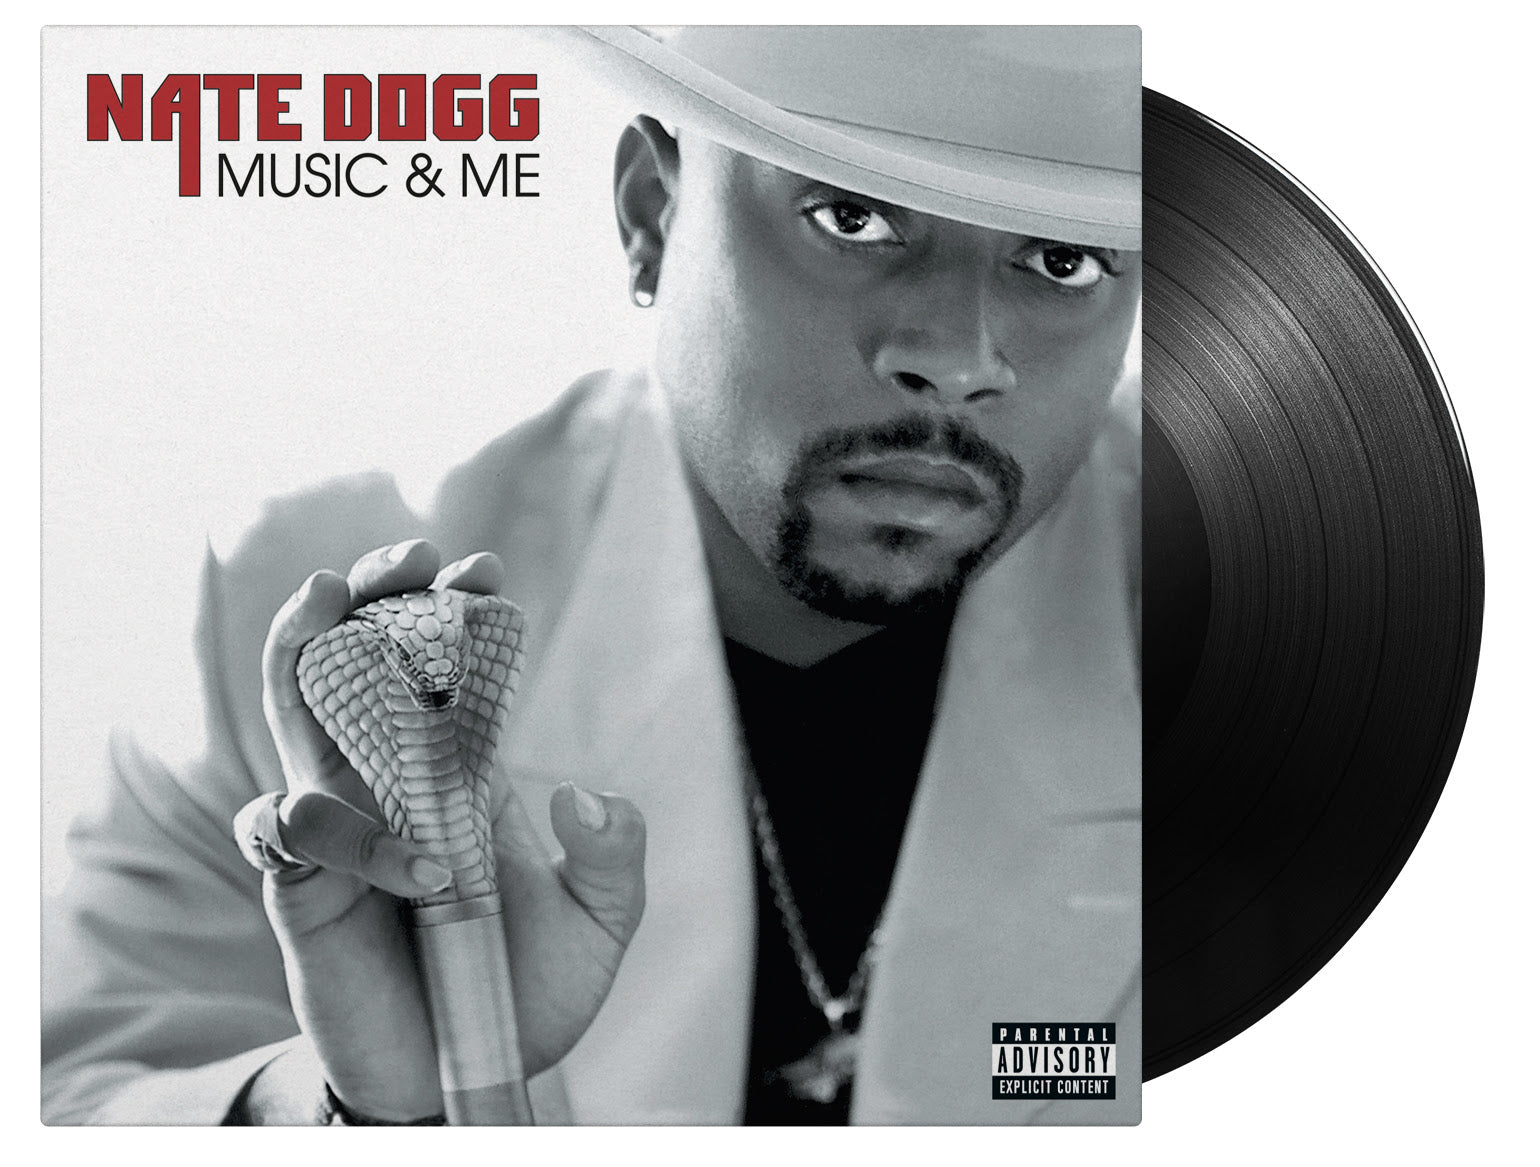  |  Vinyl LP | Nate Dogg - Music and Me (2 LPs) | Records on Vinyl